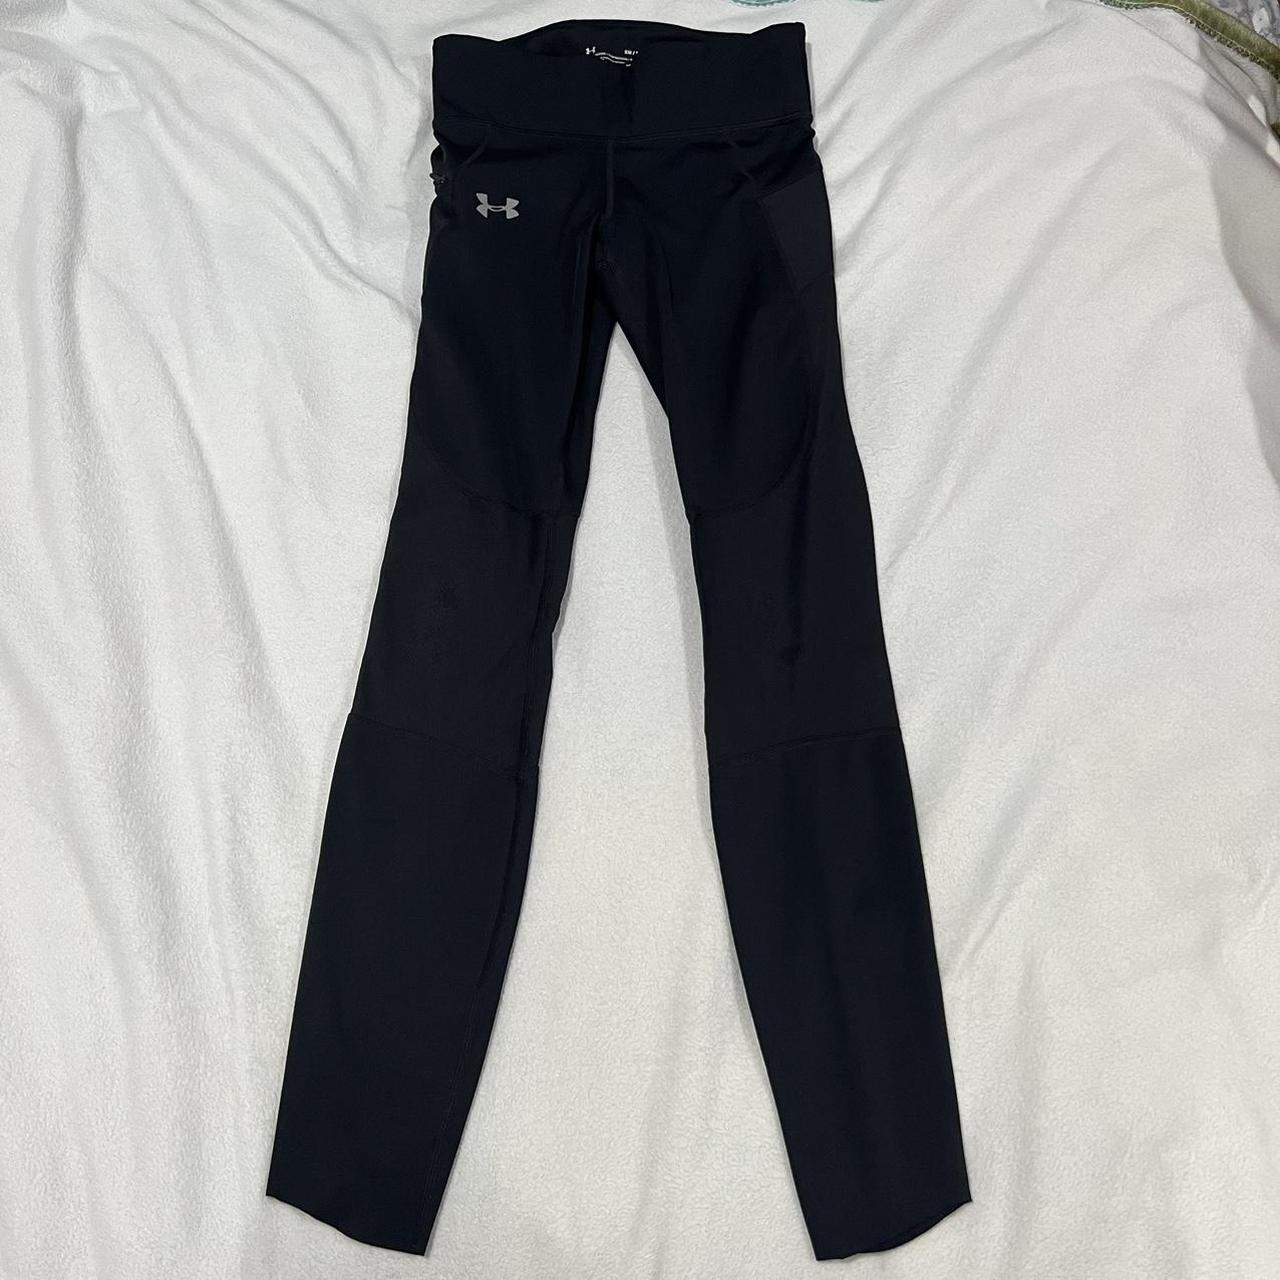 Full length underarmour compression leggings with - Depop